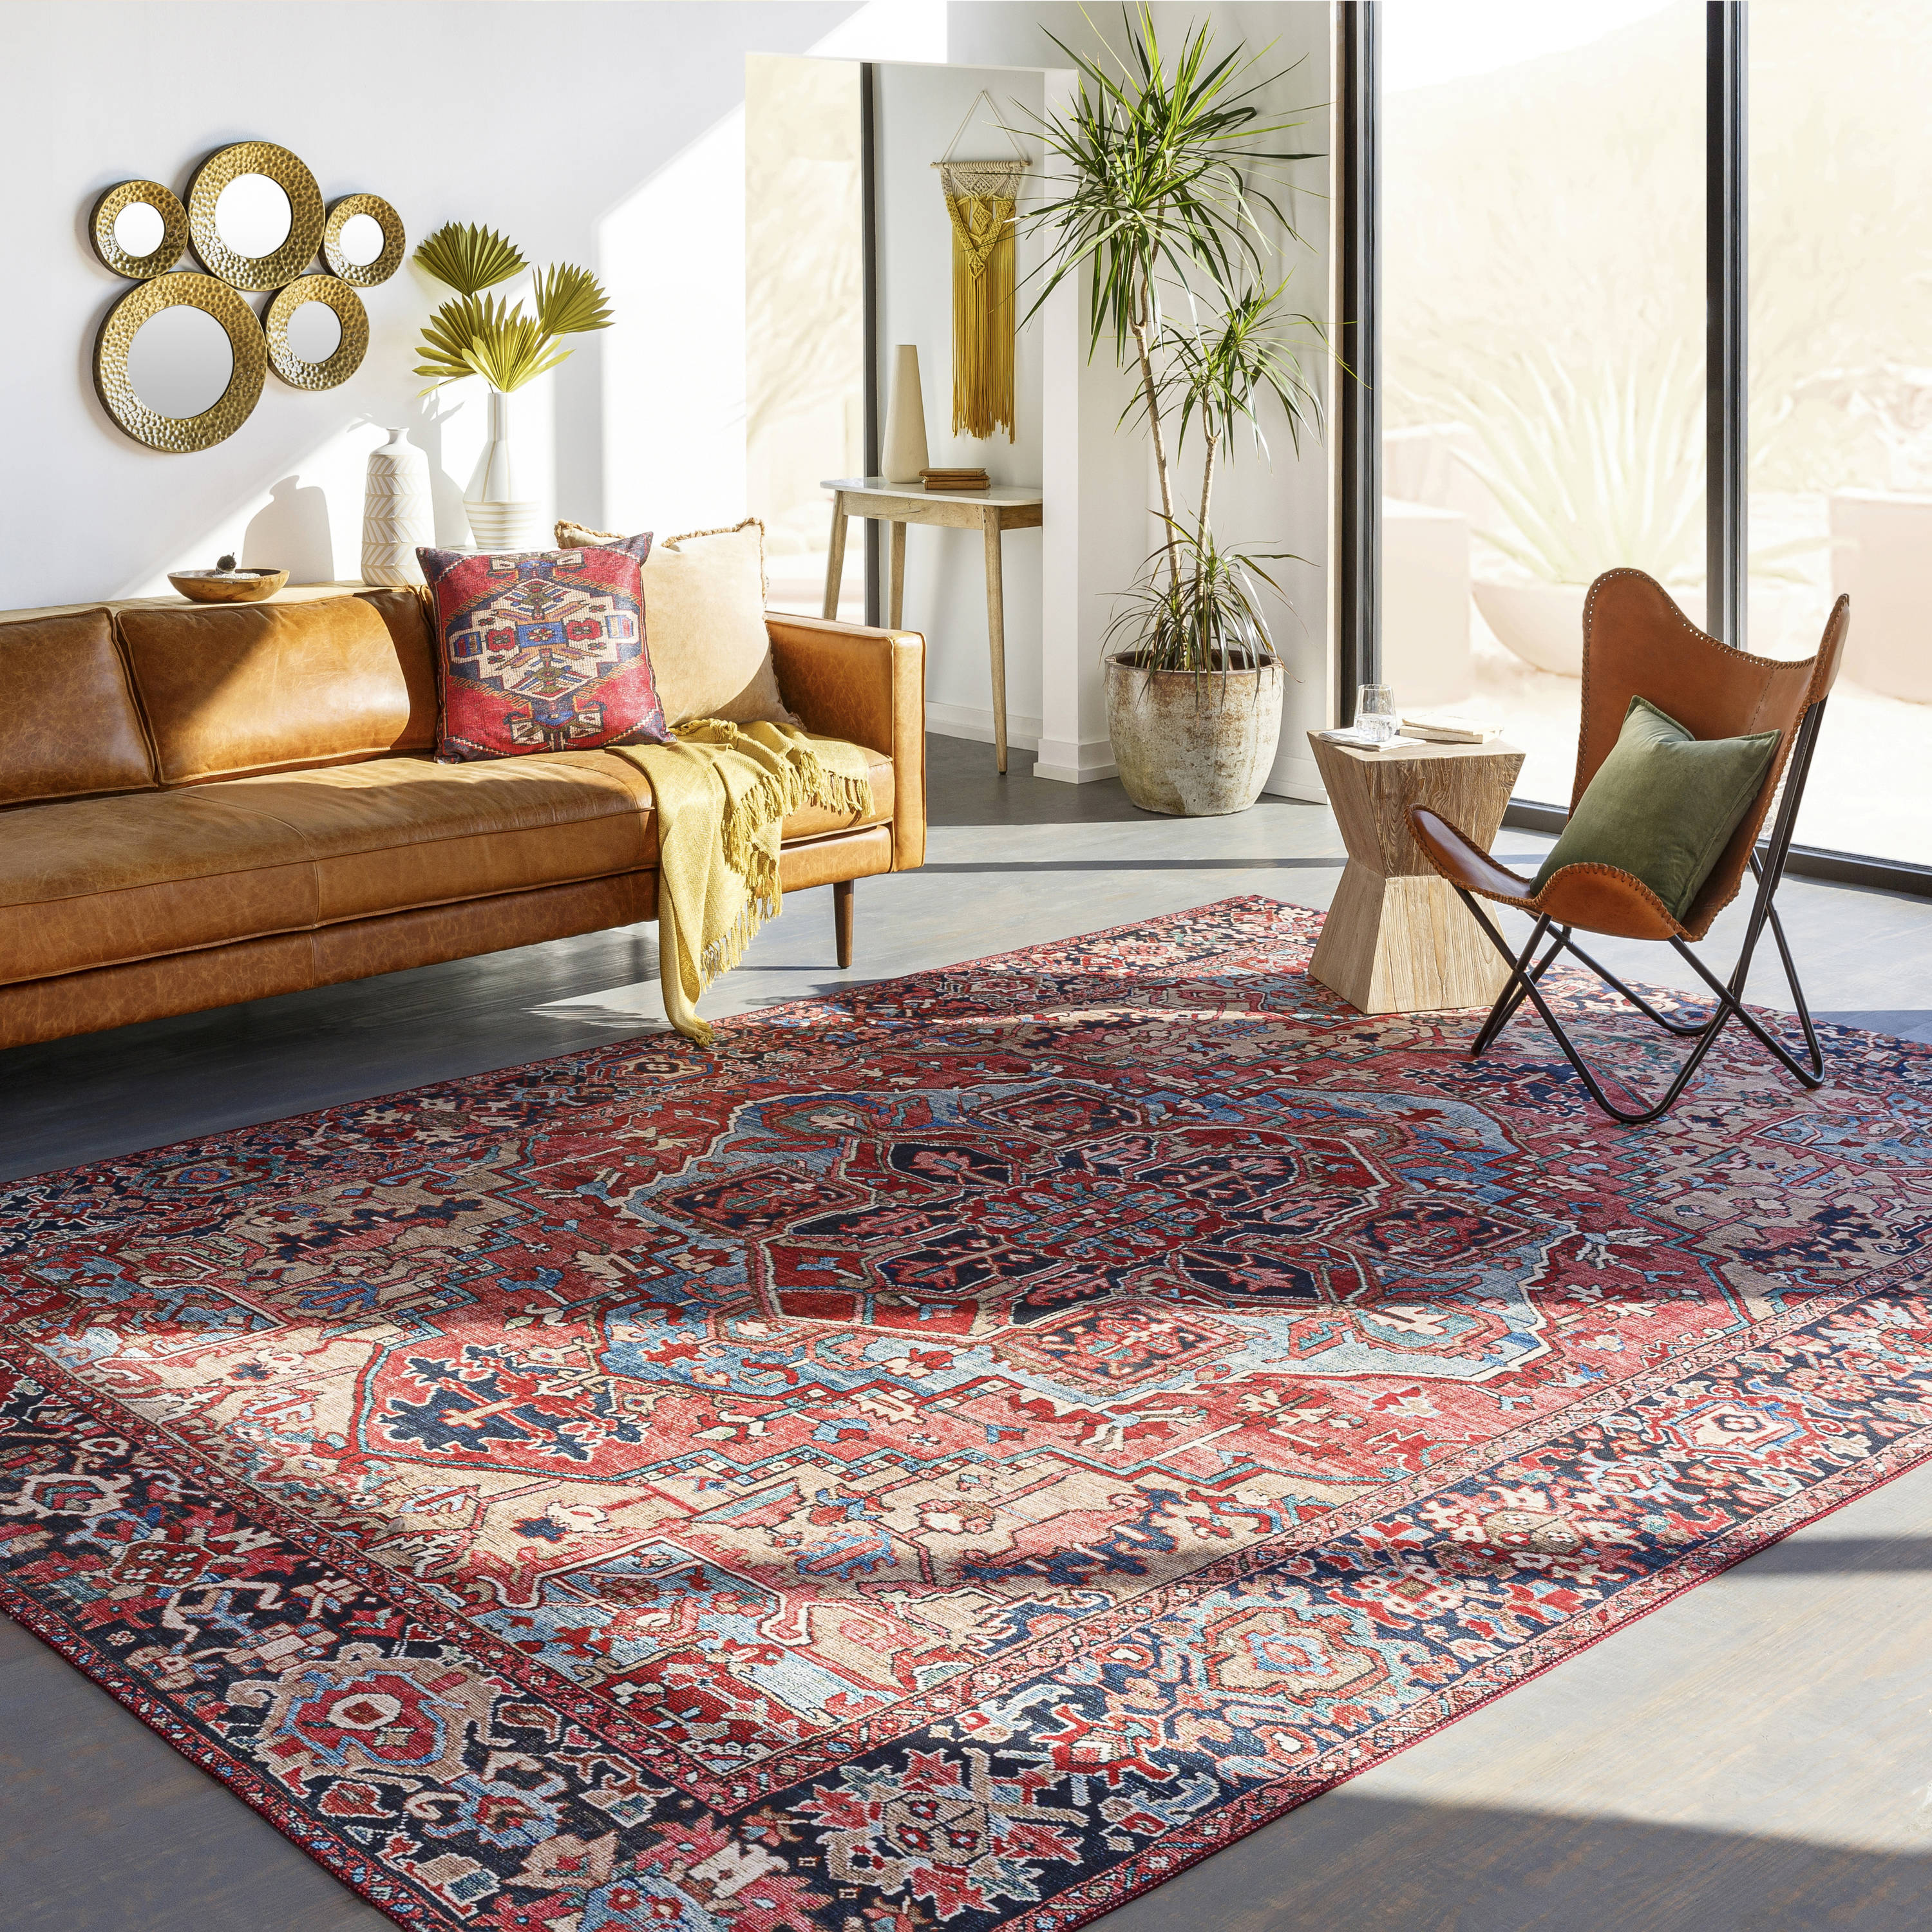 How to Store Carpets and Rugs: Guidelines | XtraSpace